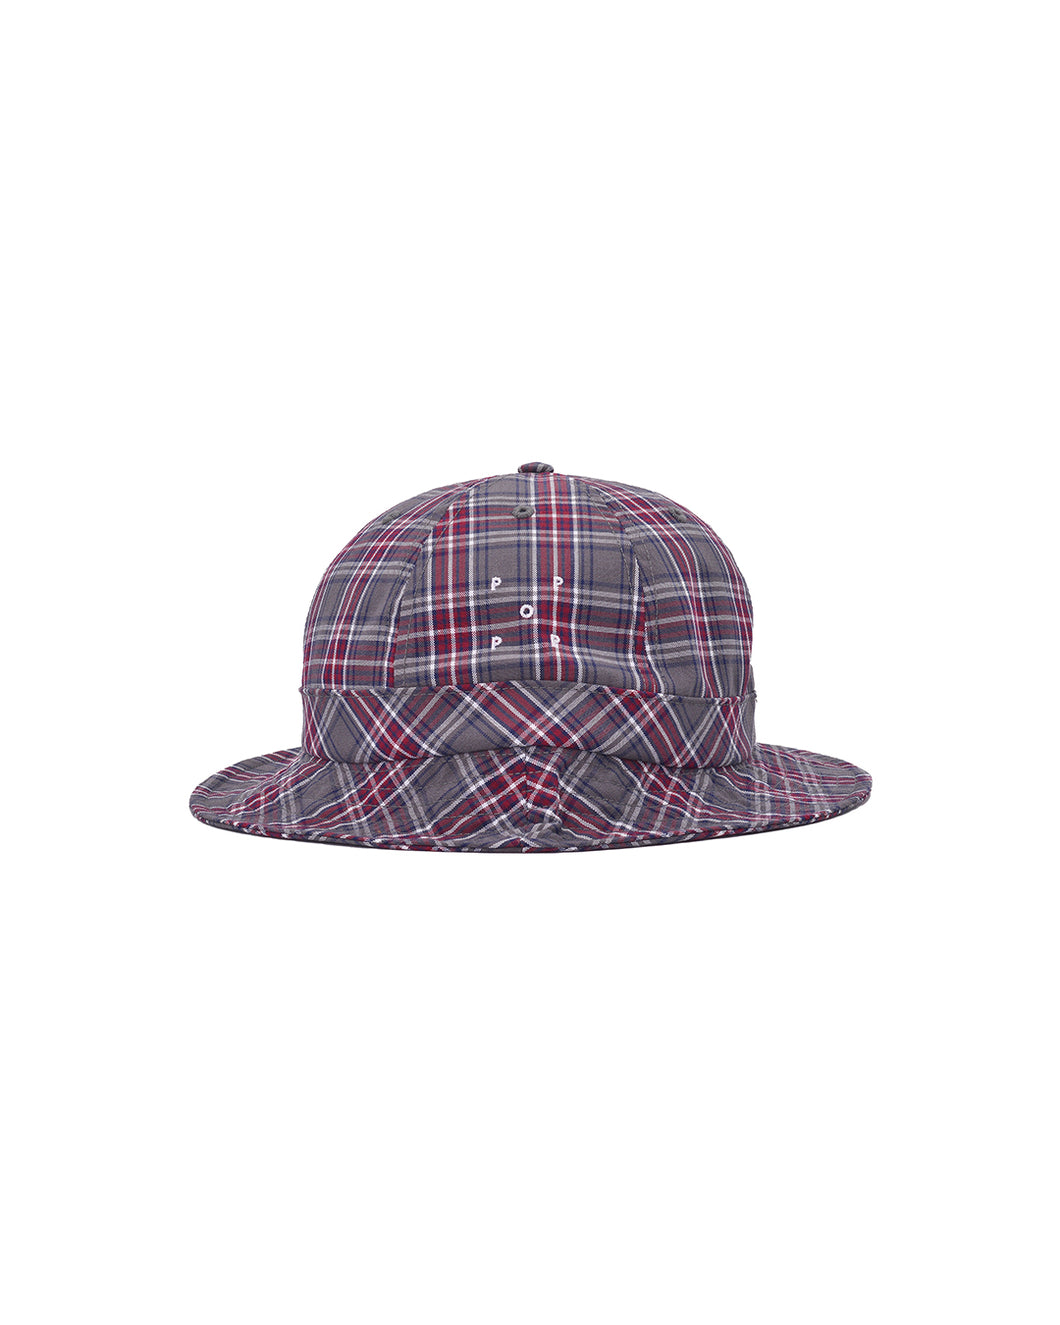 POP CHECKED BELL HAT - GREY CHECK